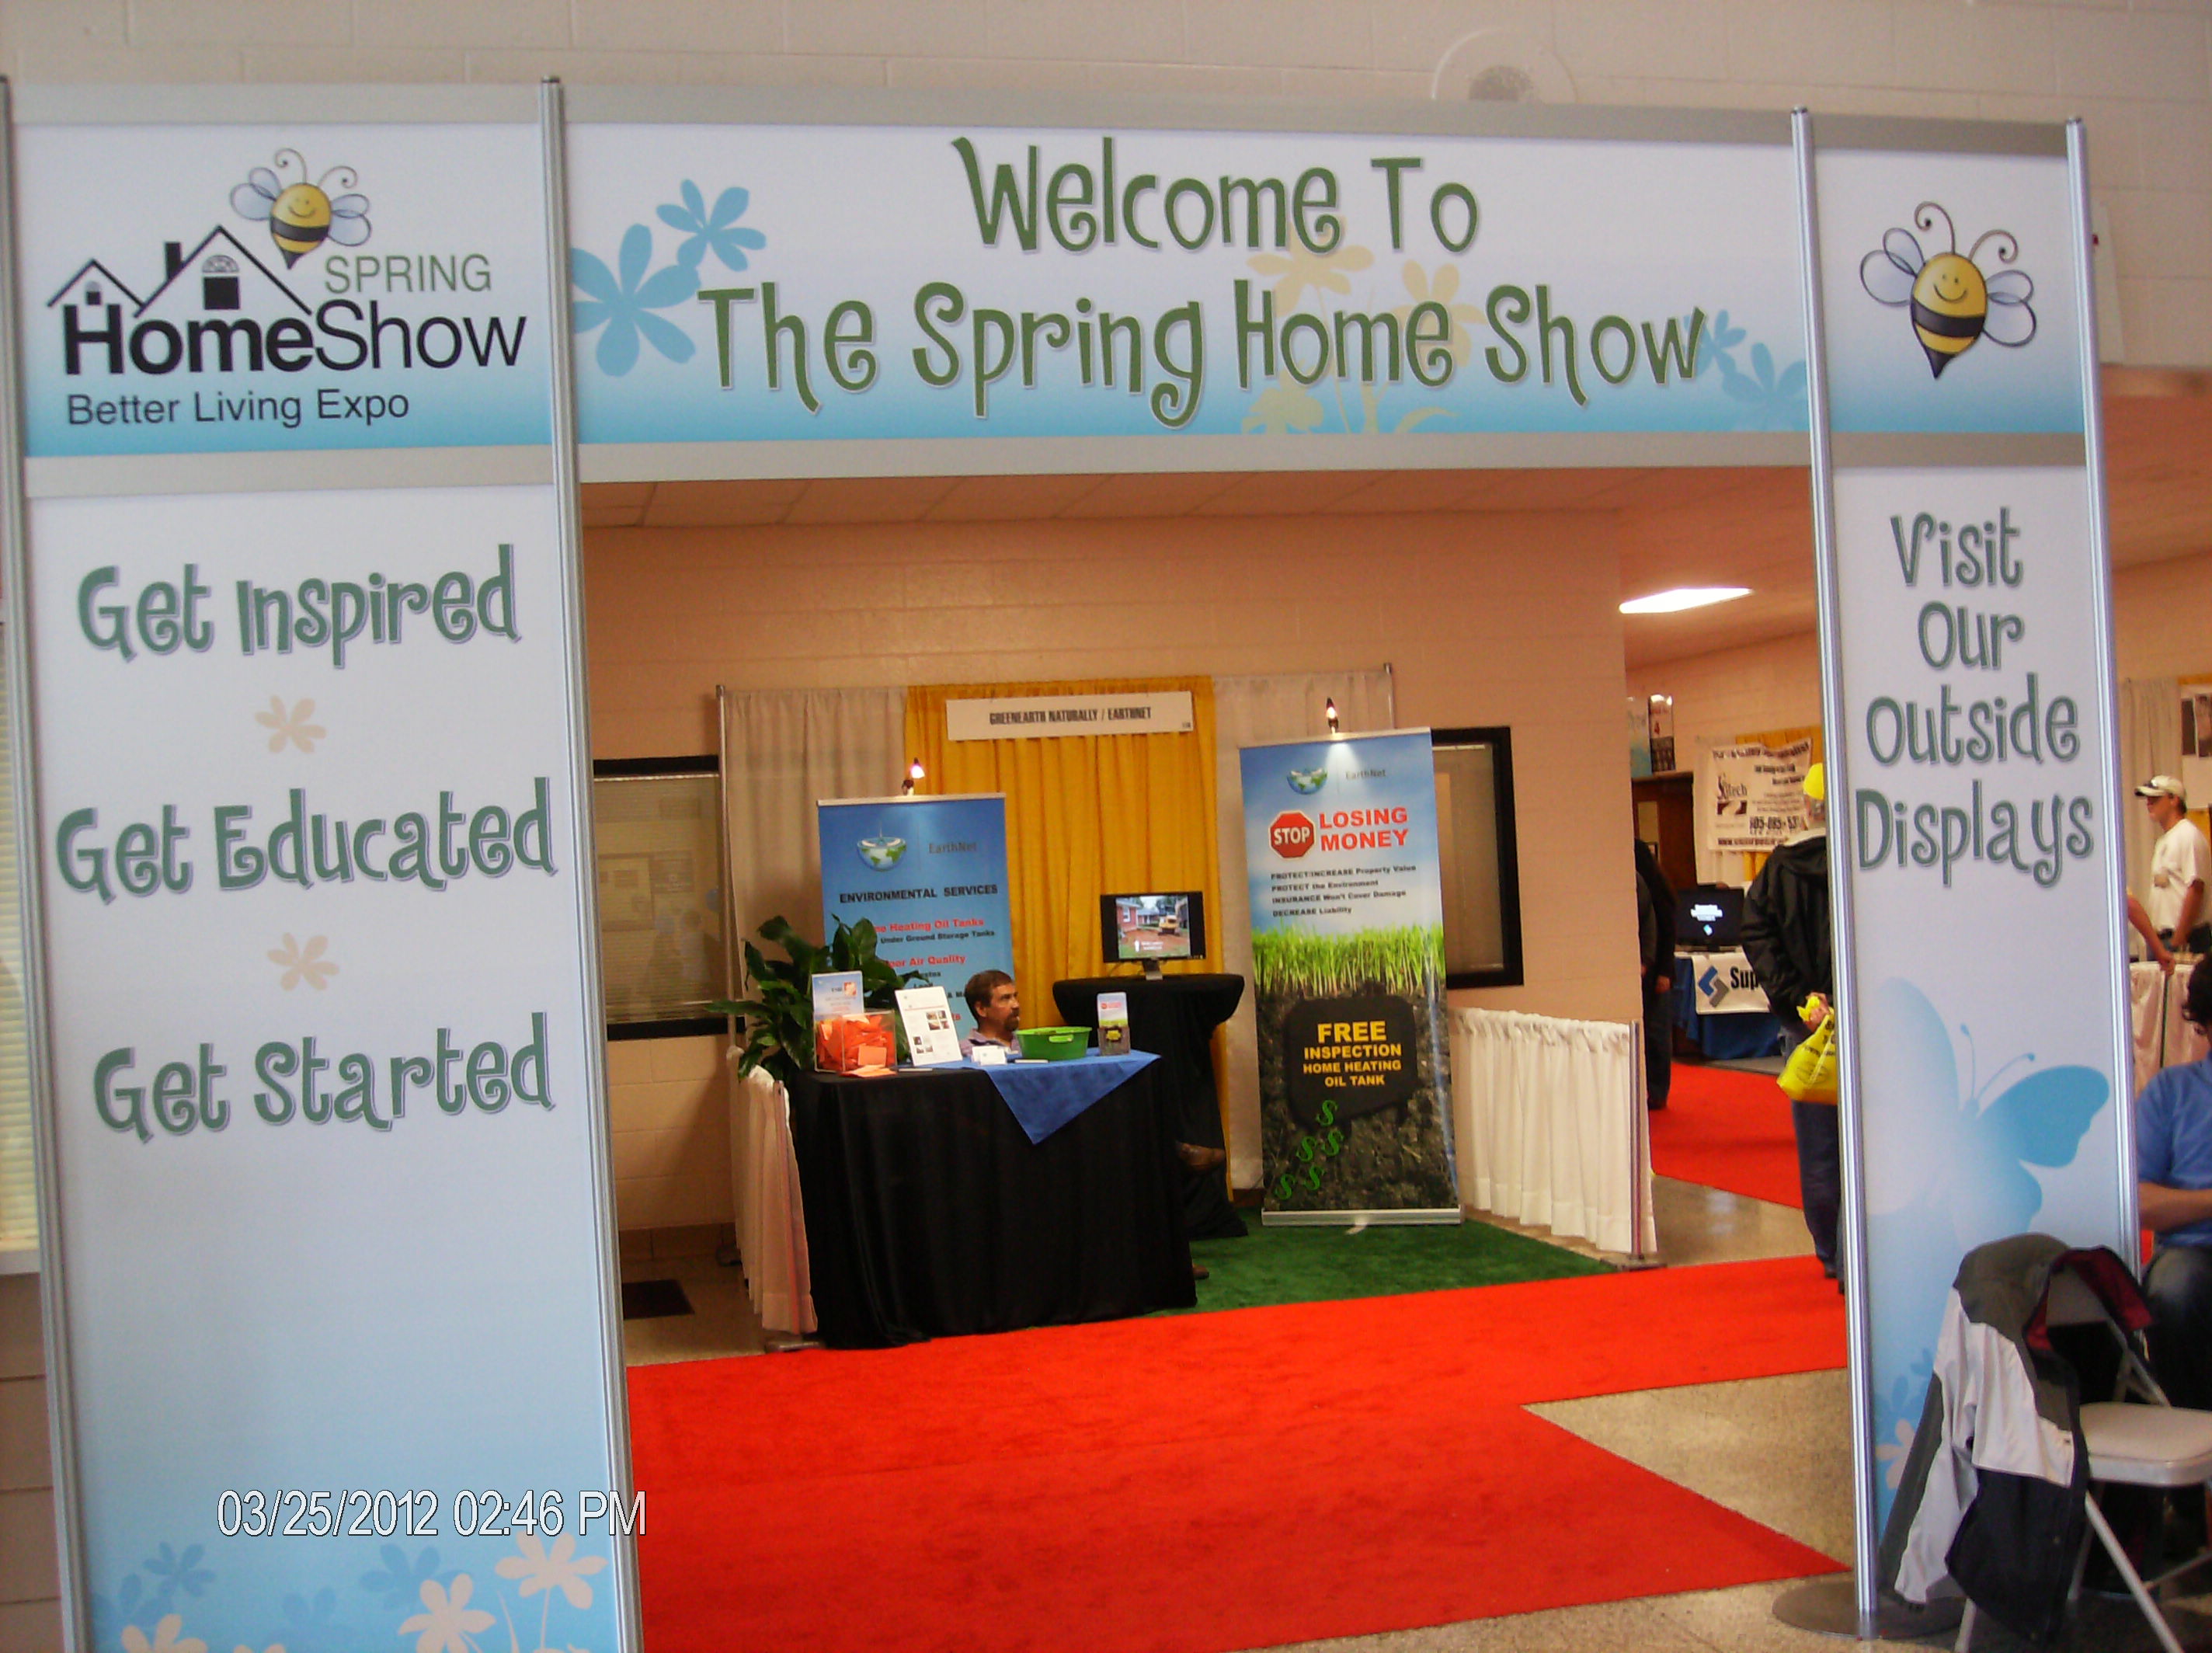 42nd Annual Spring Home Show: Better Living Expo